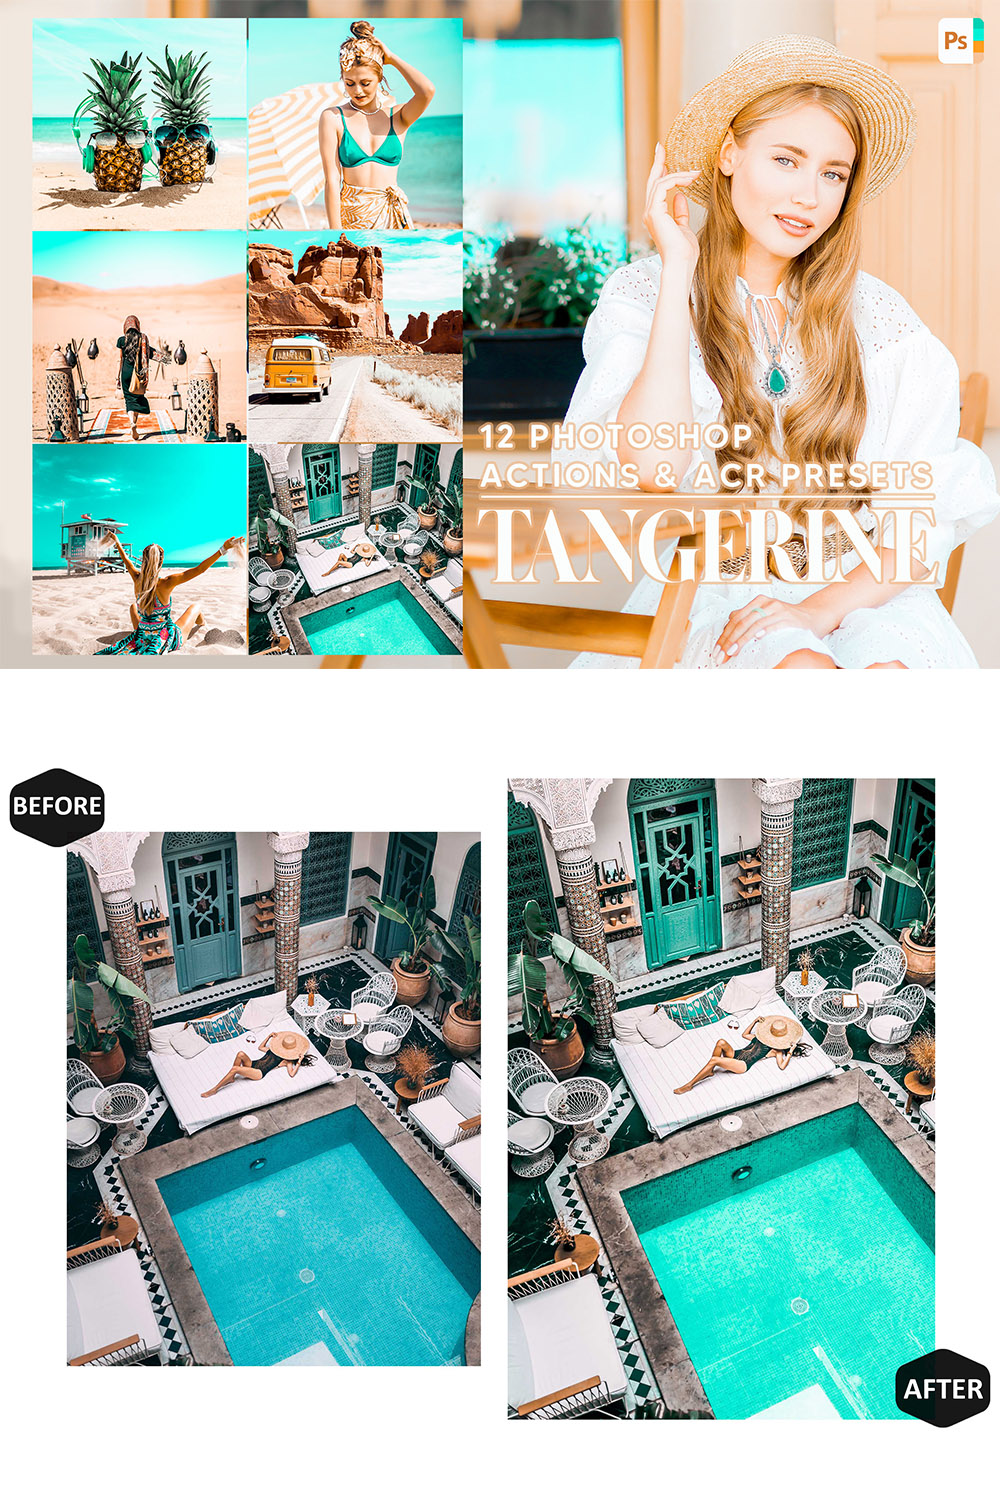 12 Photoshop Actions, Tangerine Ps Action, Bright ACR Preset, Teal Blue Ps Filter, Portrait And Lifestyle Theme For Instagram, Blogger pinterest preview image.